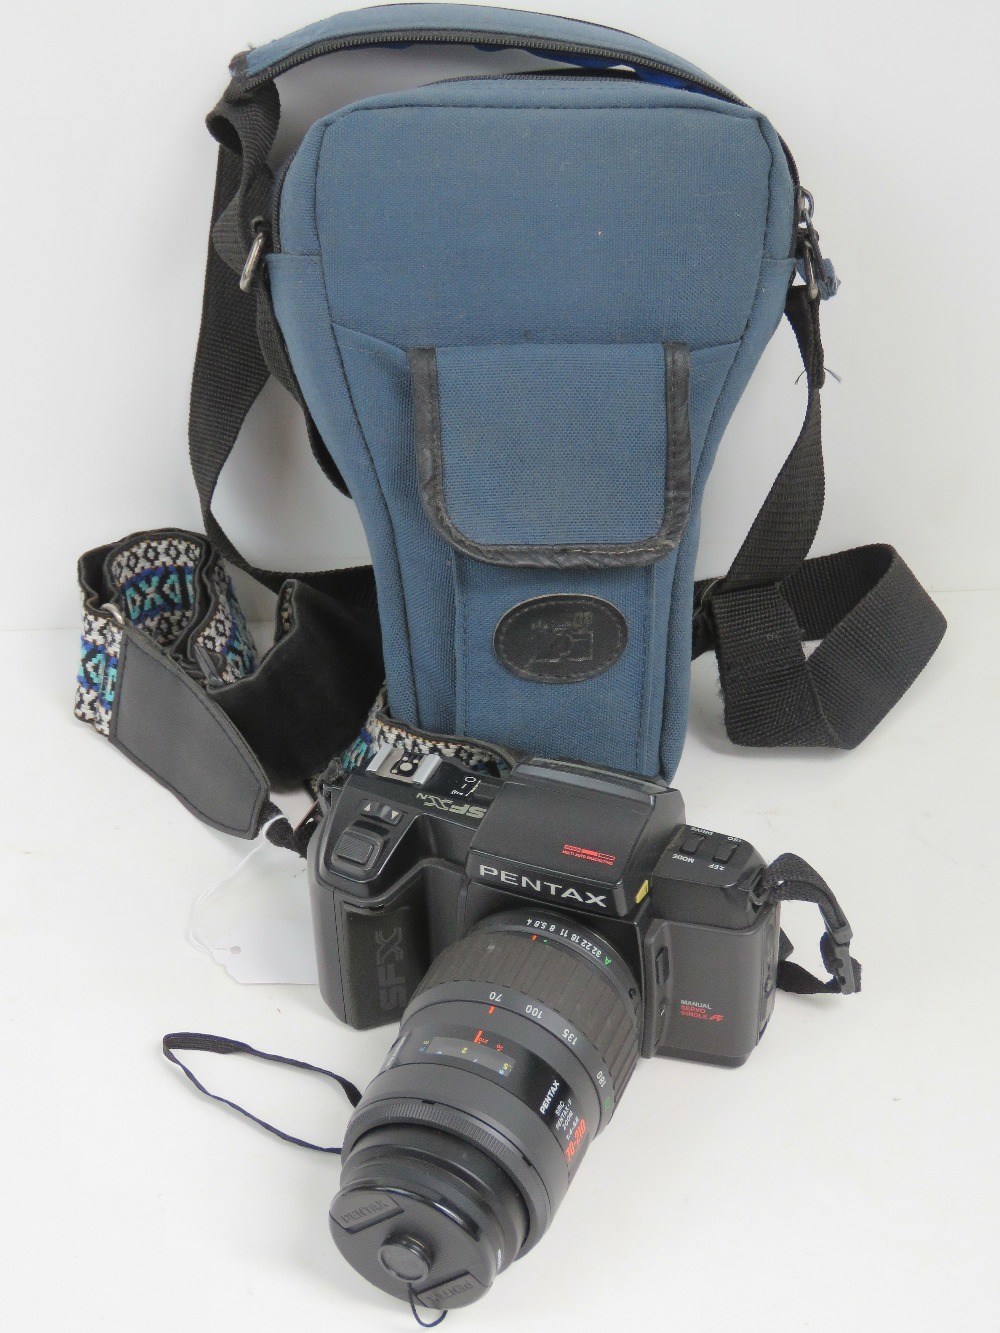 A Pentax SFX 35mm SLR camera having 70-210mm 1:4-5.6 Pentax lense, with padded carry case.